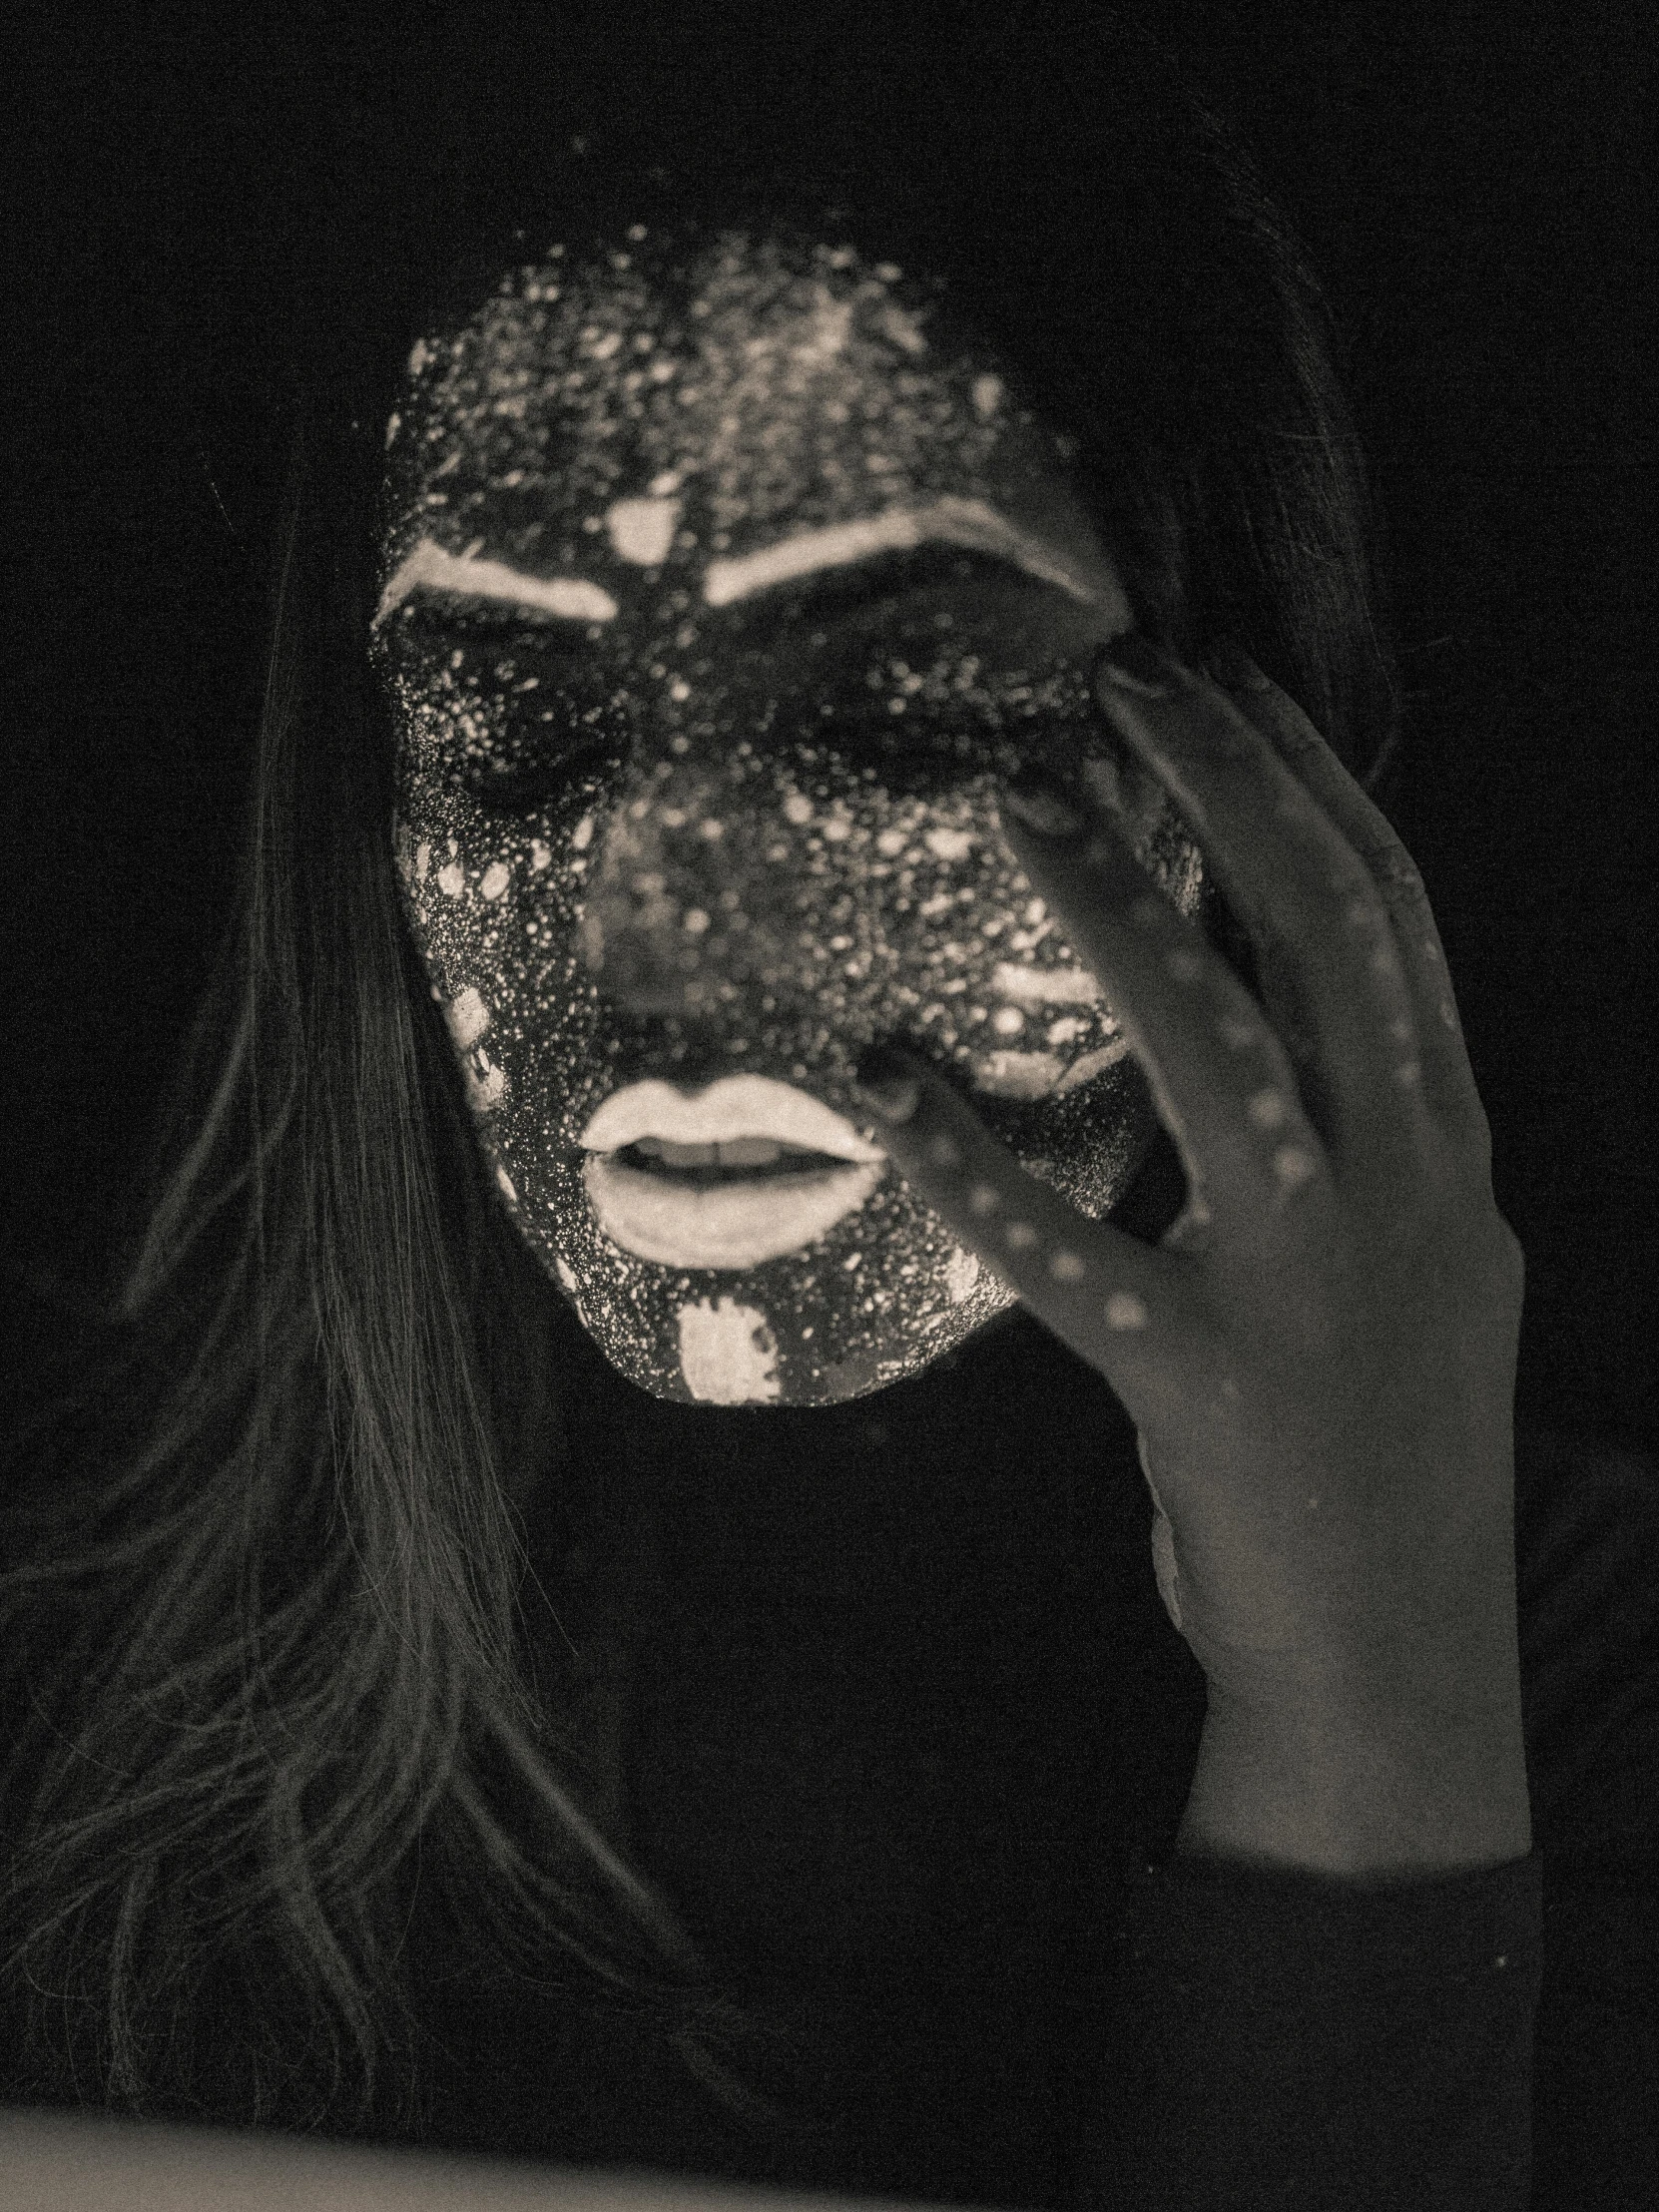 a black and white photo of a woman with glitter on her face, a black and white photo, pexels contest winner, transgressive art, black mask, hands shielding face, day - glow facepaint, grainy damaged photo